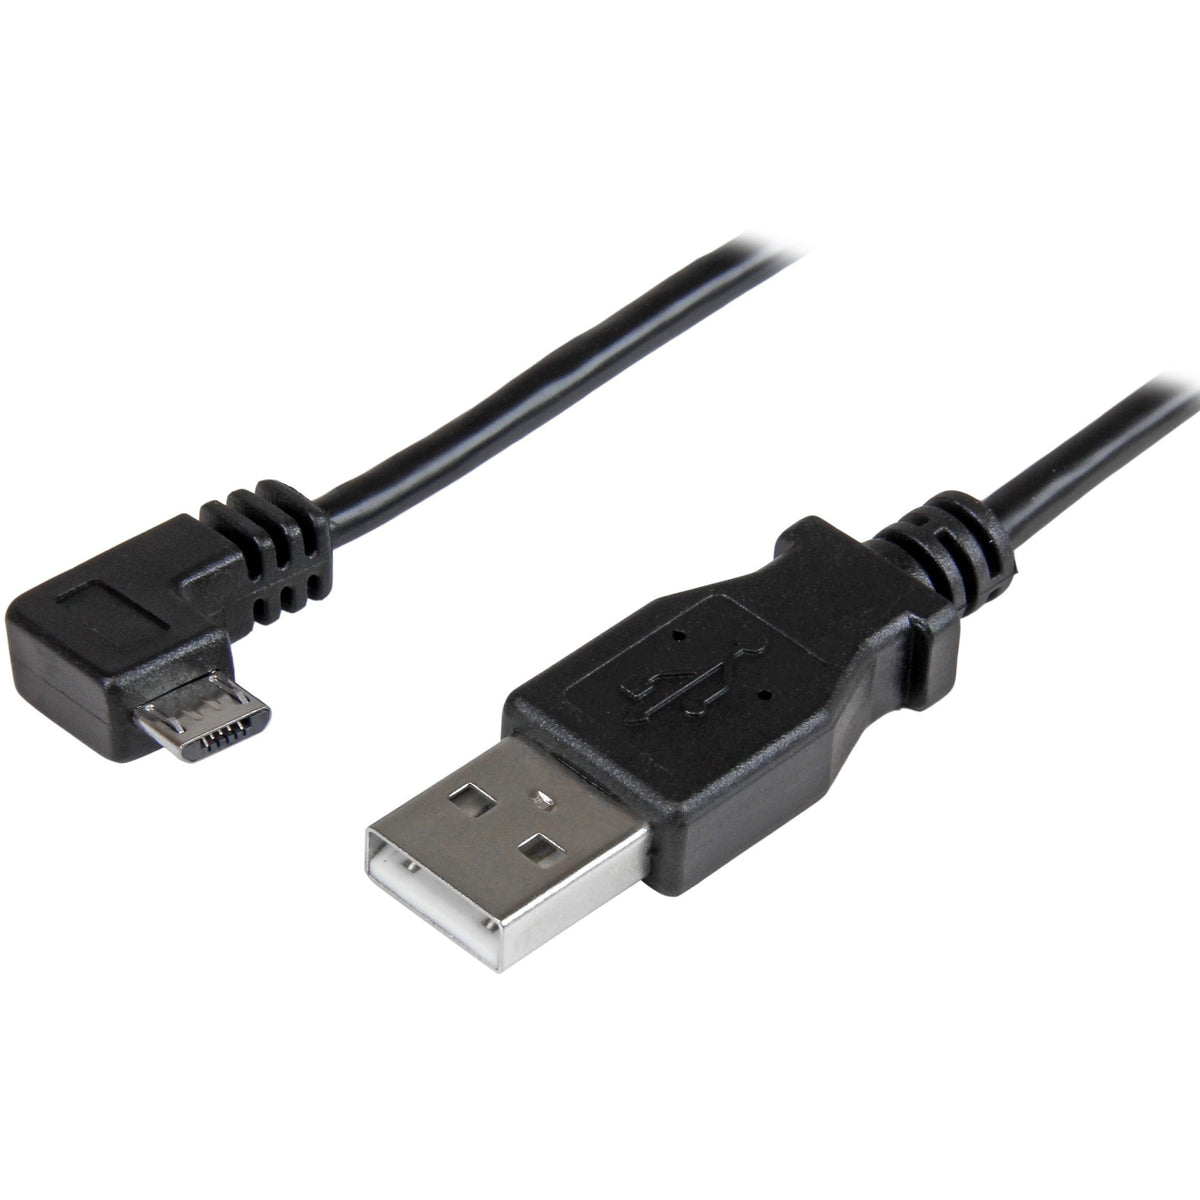 StarTech.com 0.5 m Right Angle Micro USB Cable - Charge and Sync Cable - USB to Micro USB - 24 AWG - USBAUB50CMRA